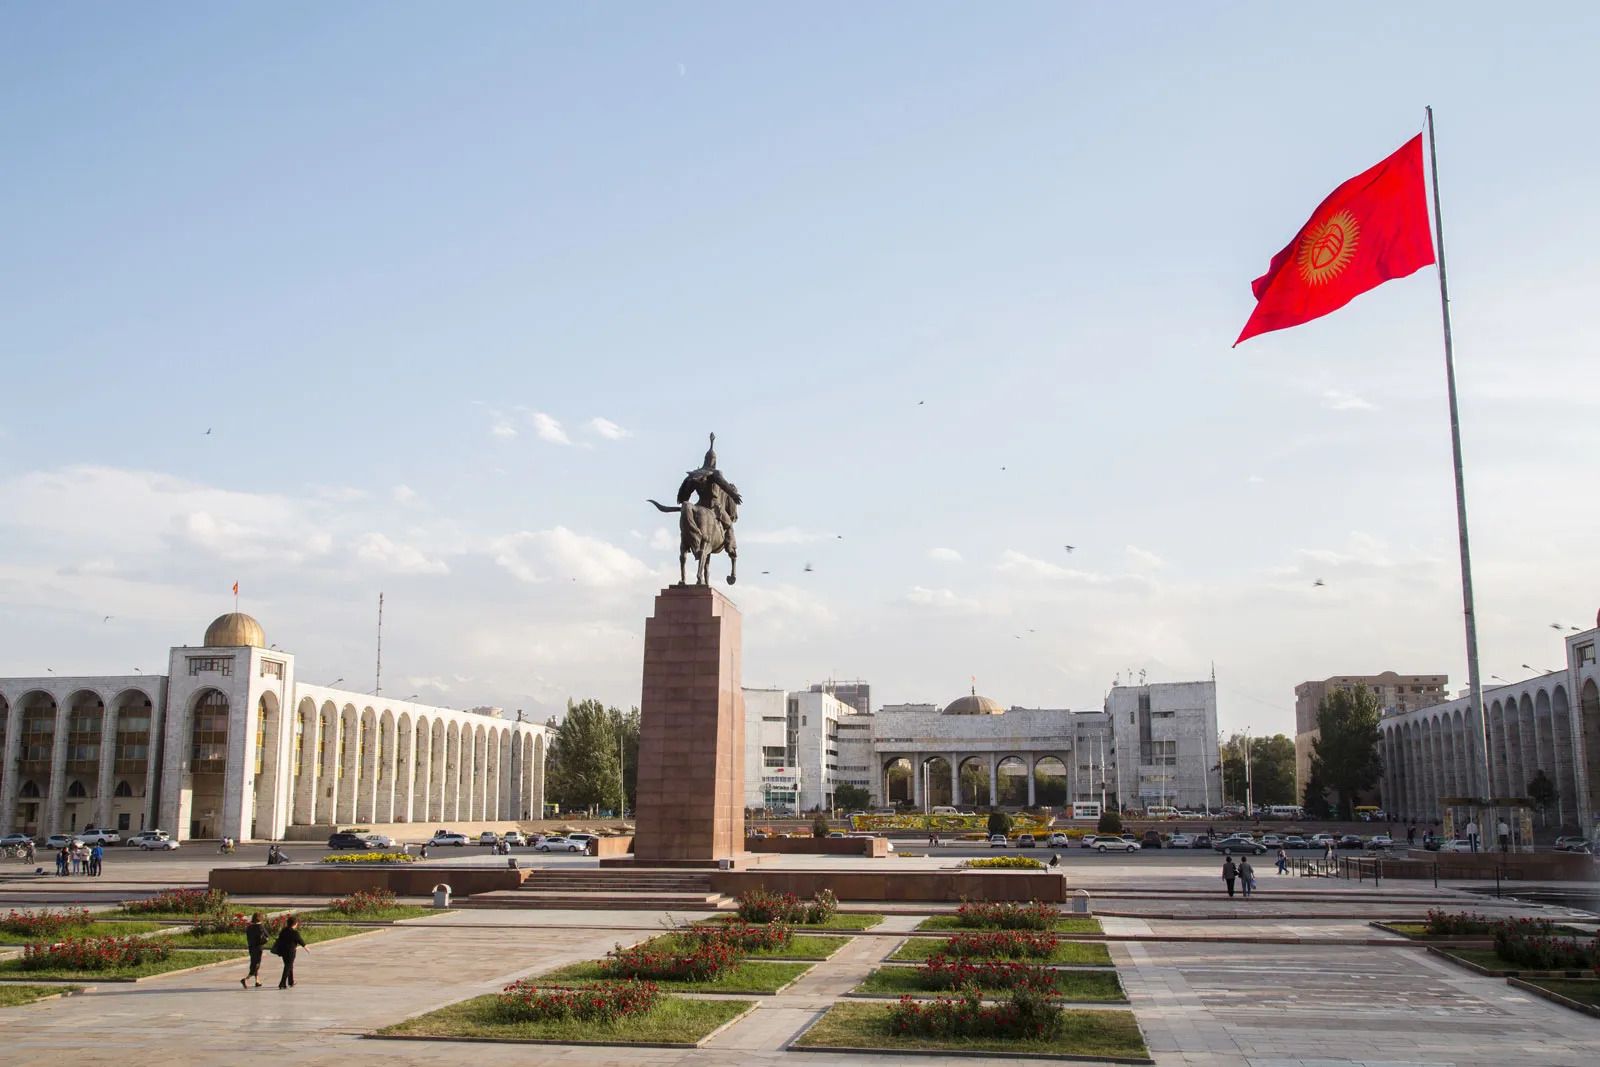 Every day 27 Kyrgyzstanis leave the country for migration